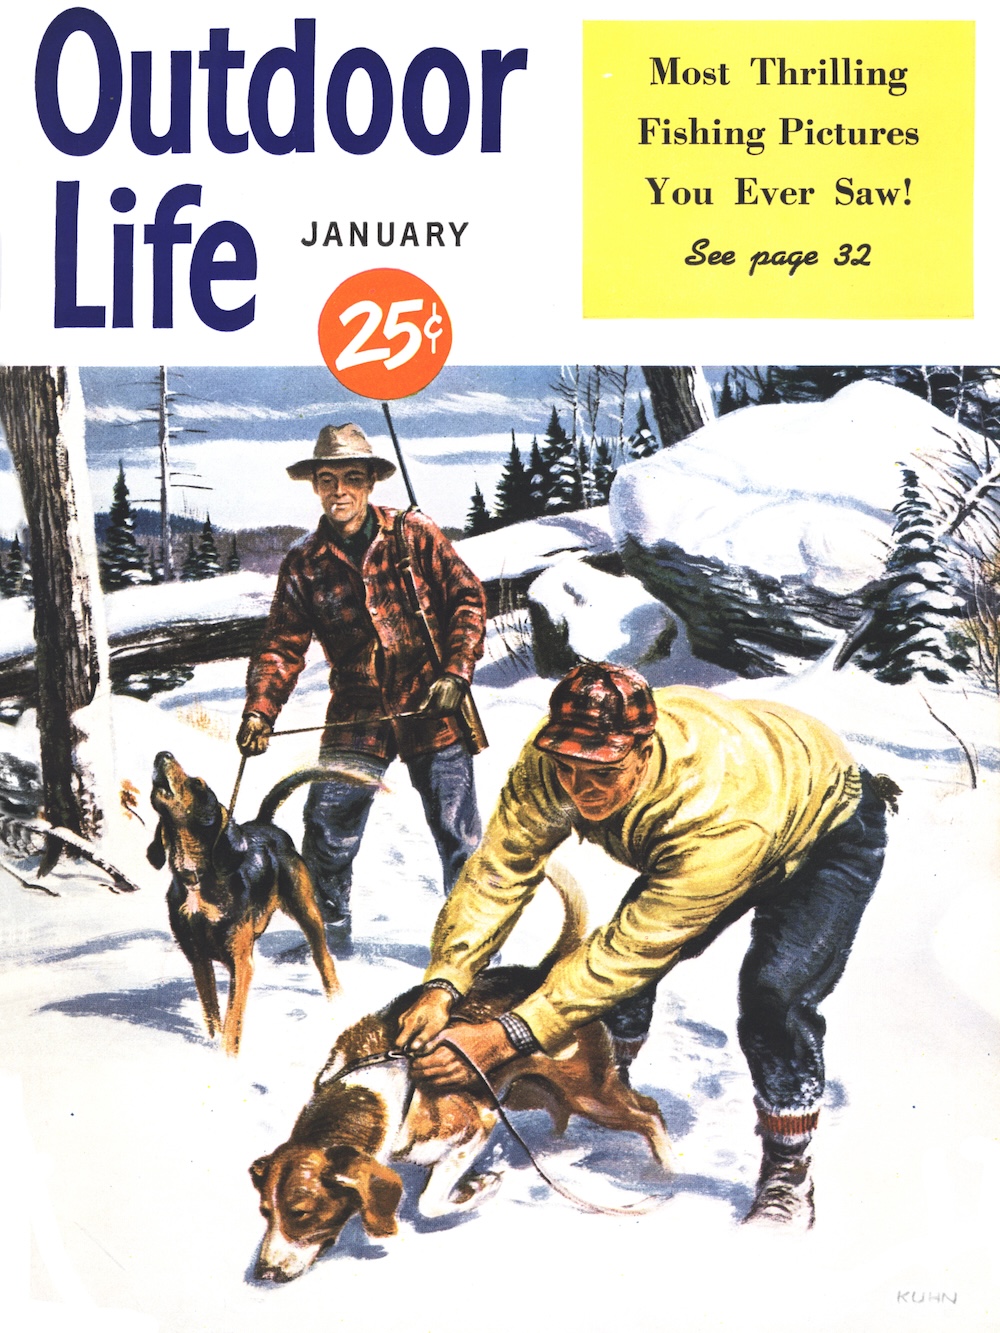 The cover from the January 1951 issue of Outdoor Life.